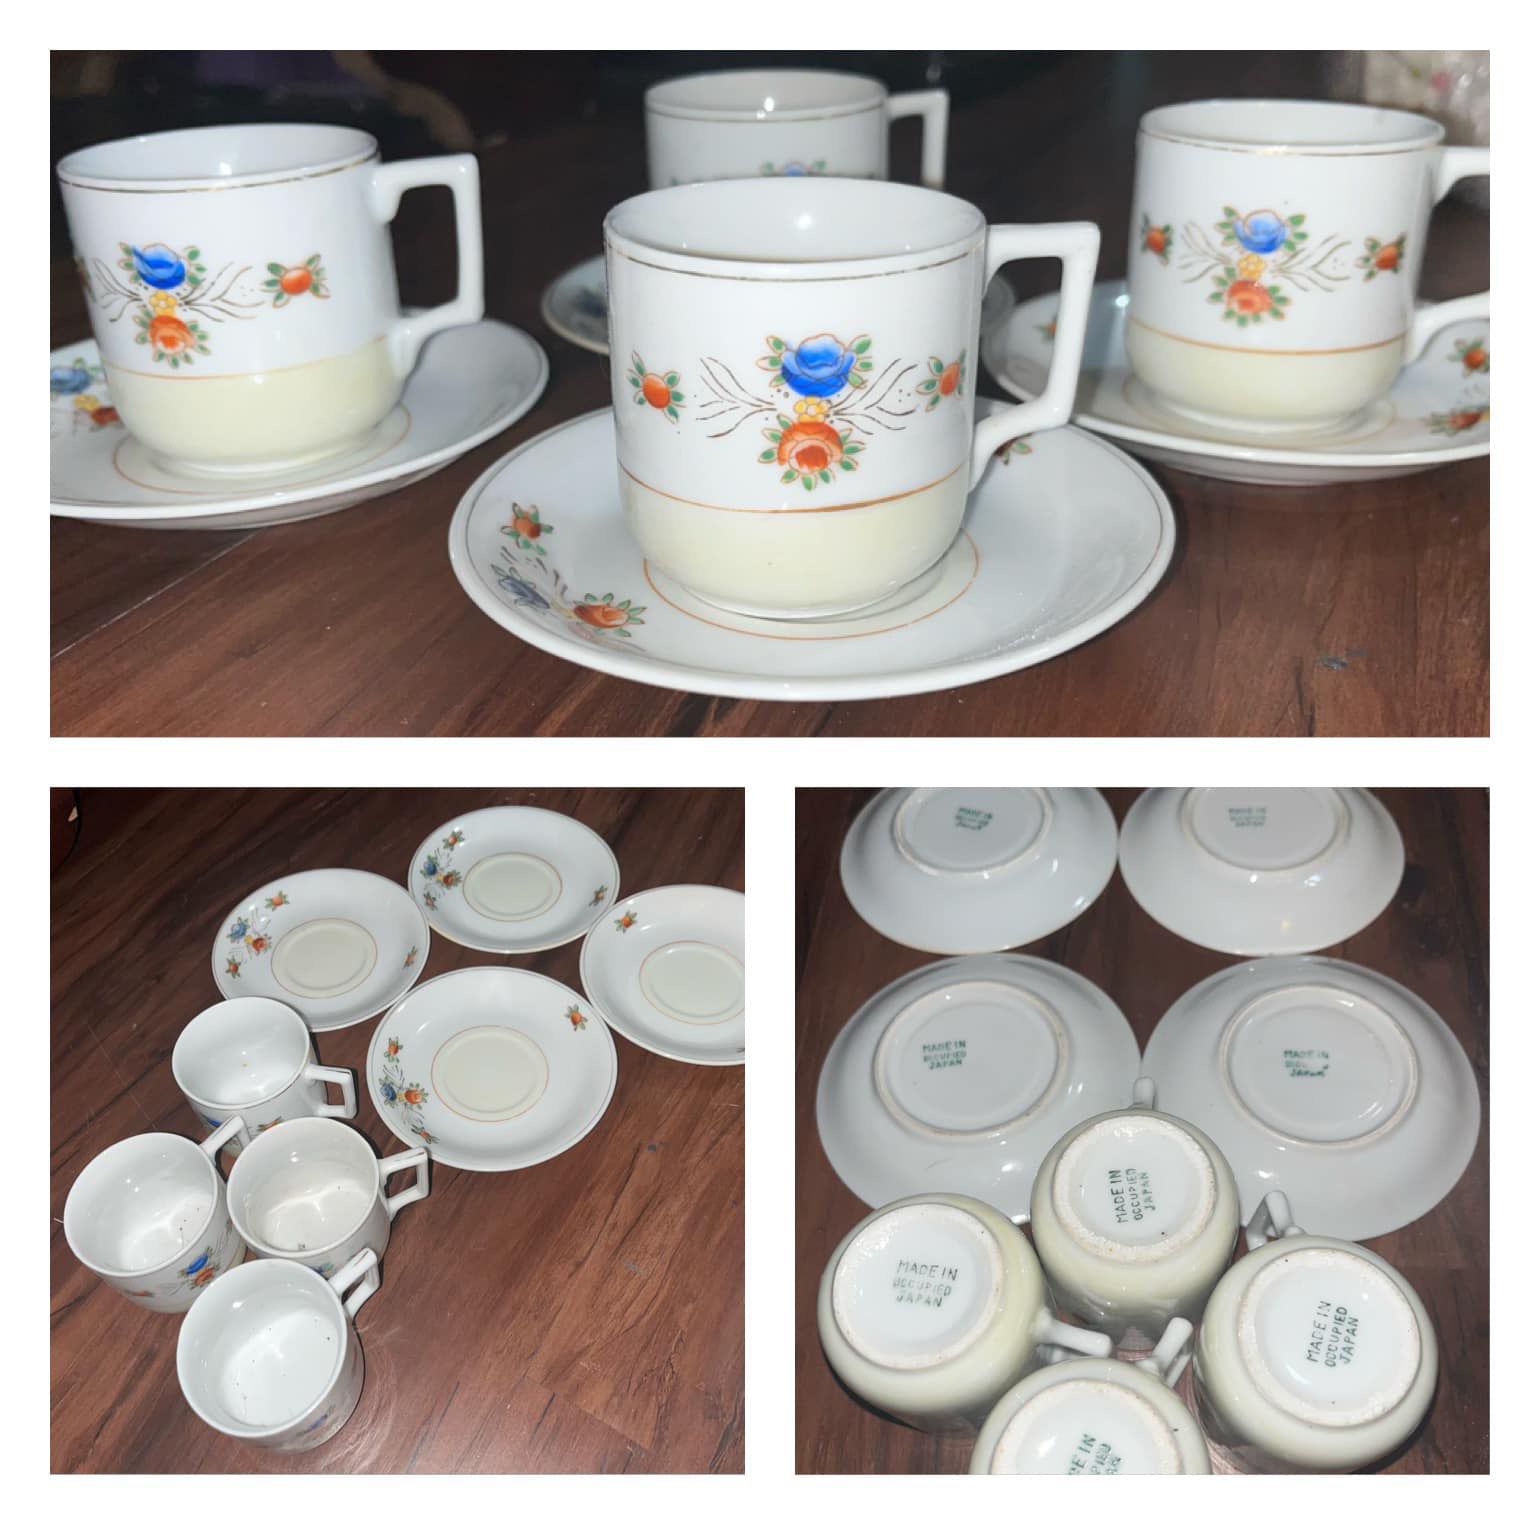 VINTAGE JAPANESE TEA SET w/ 4 Cups & Saucers (Made in Occupied Japan)